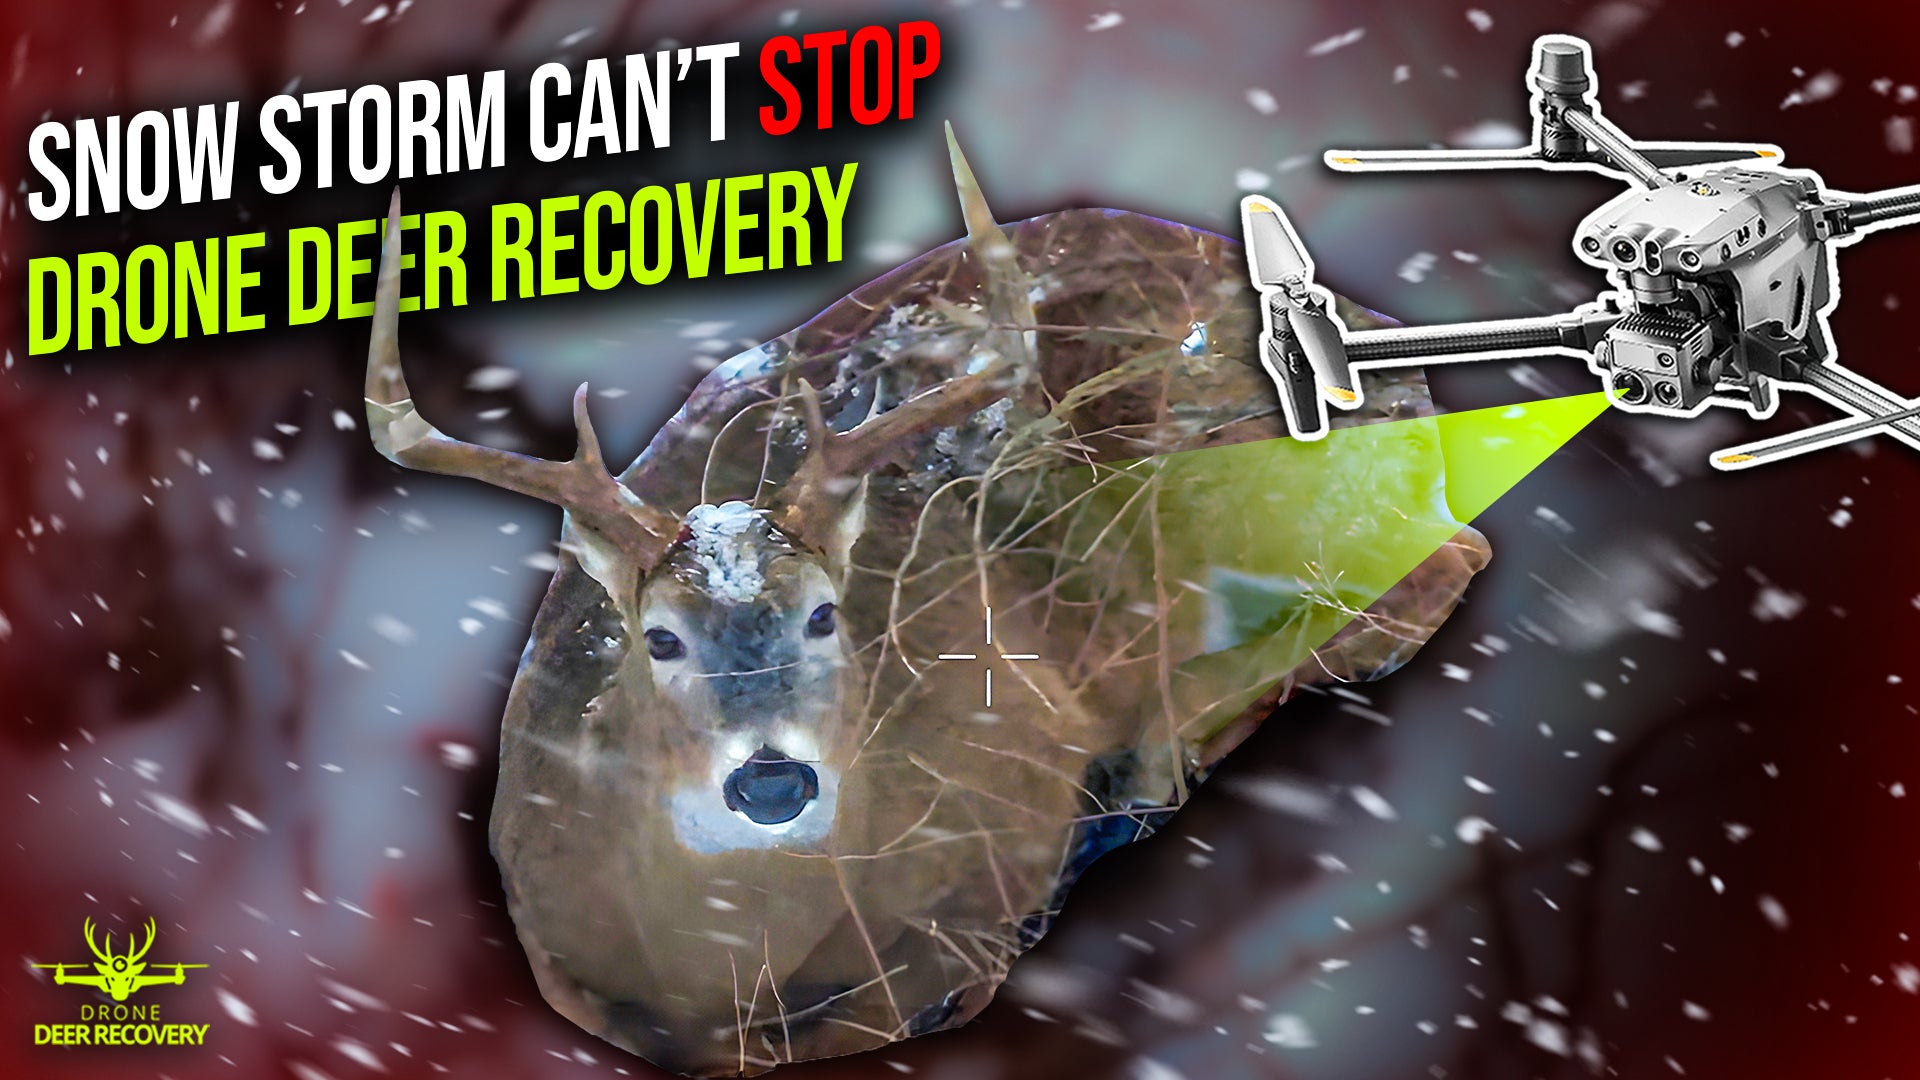 Snow Storm Can’t Stop Drone Deer Recovery from Locating Buck